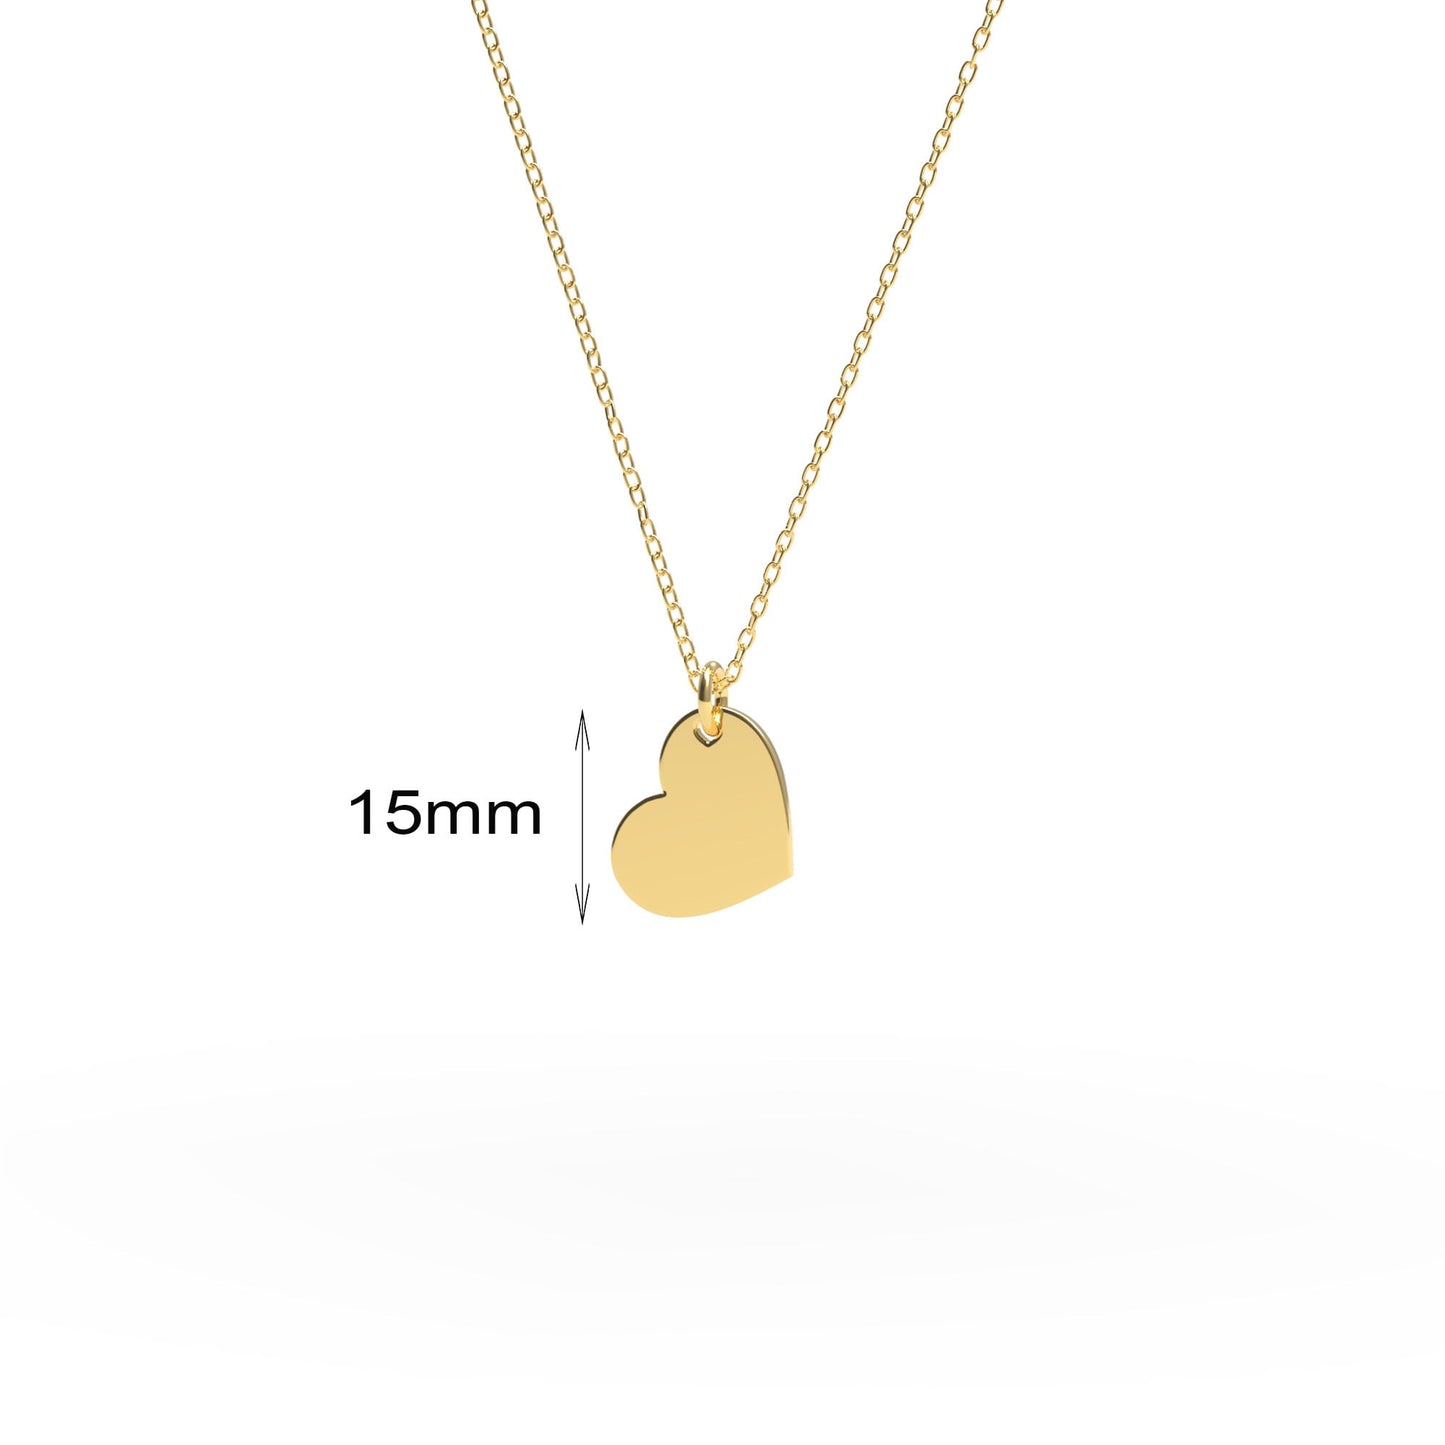 Custom Heart Necklace • Engrave Heart Pendant • Personalized 14k solid gold Charm • message Jewelry • Real gold Sister Mother Gift